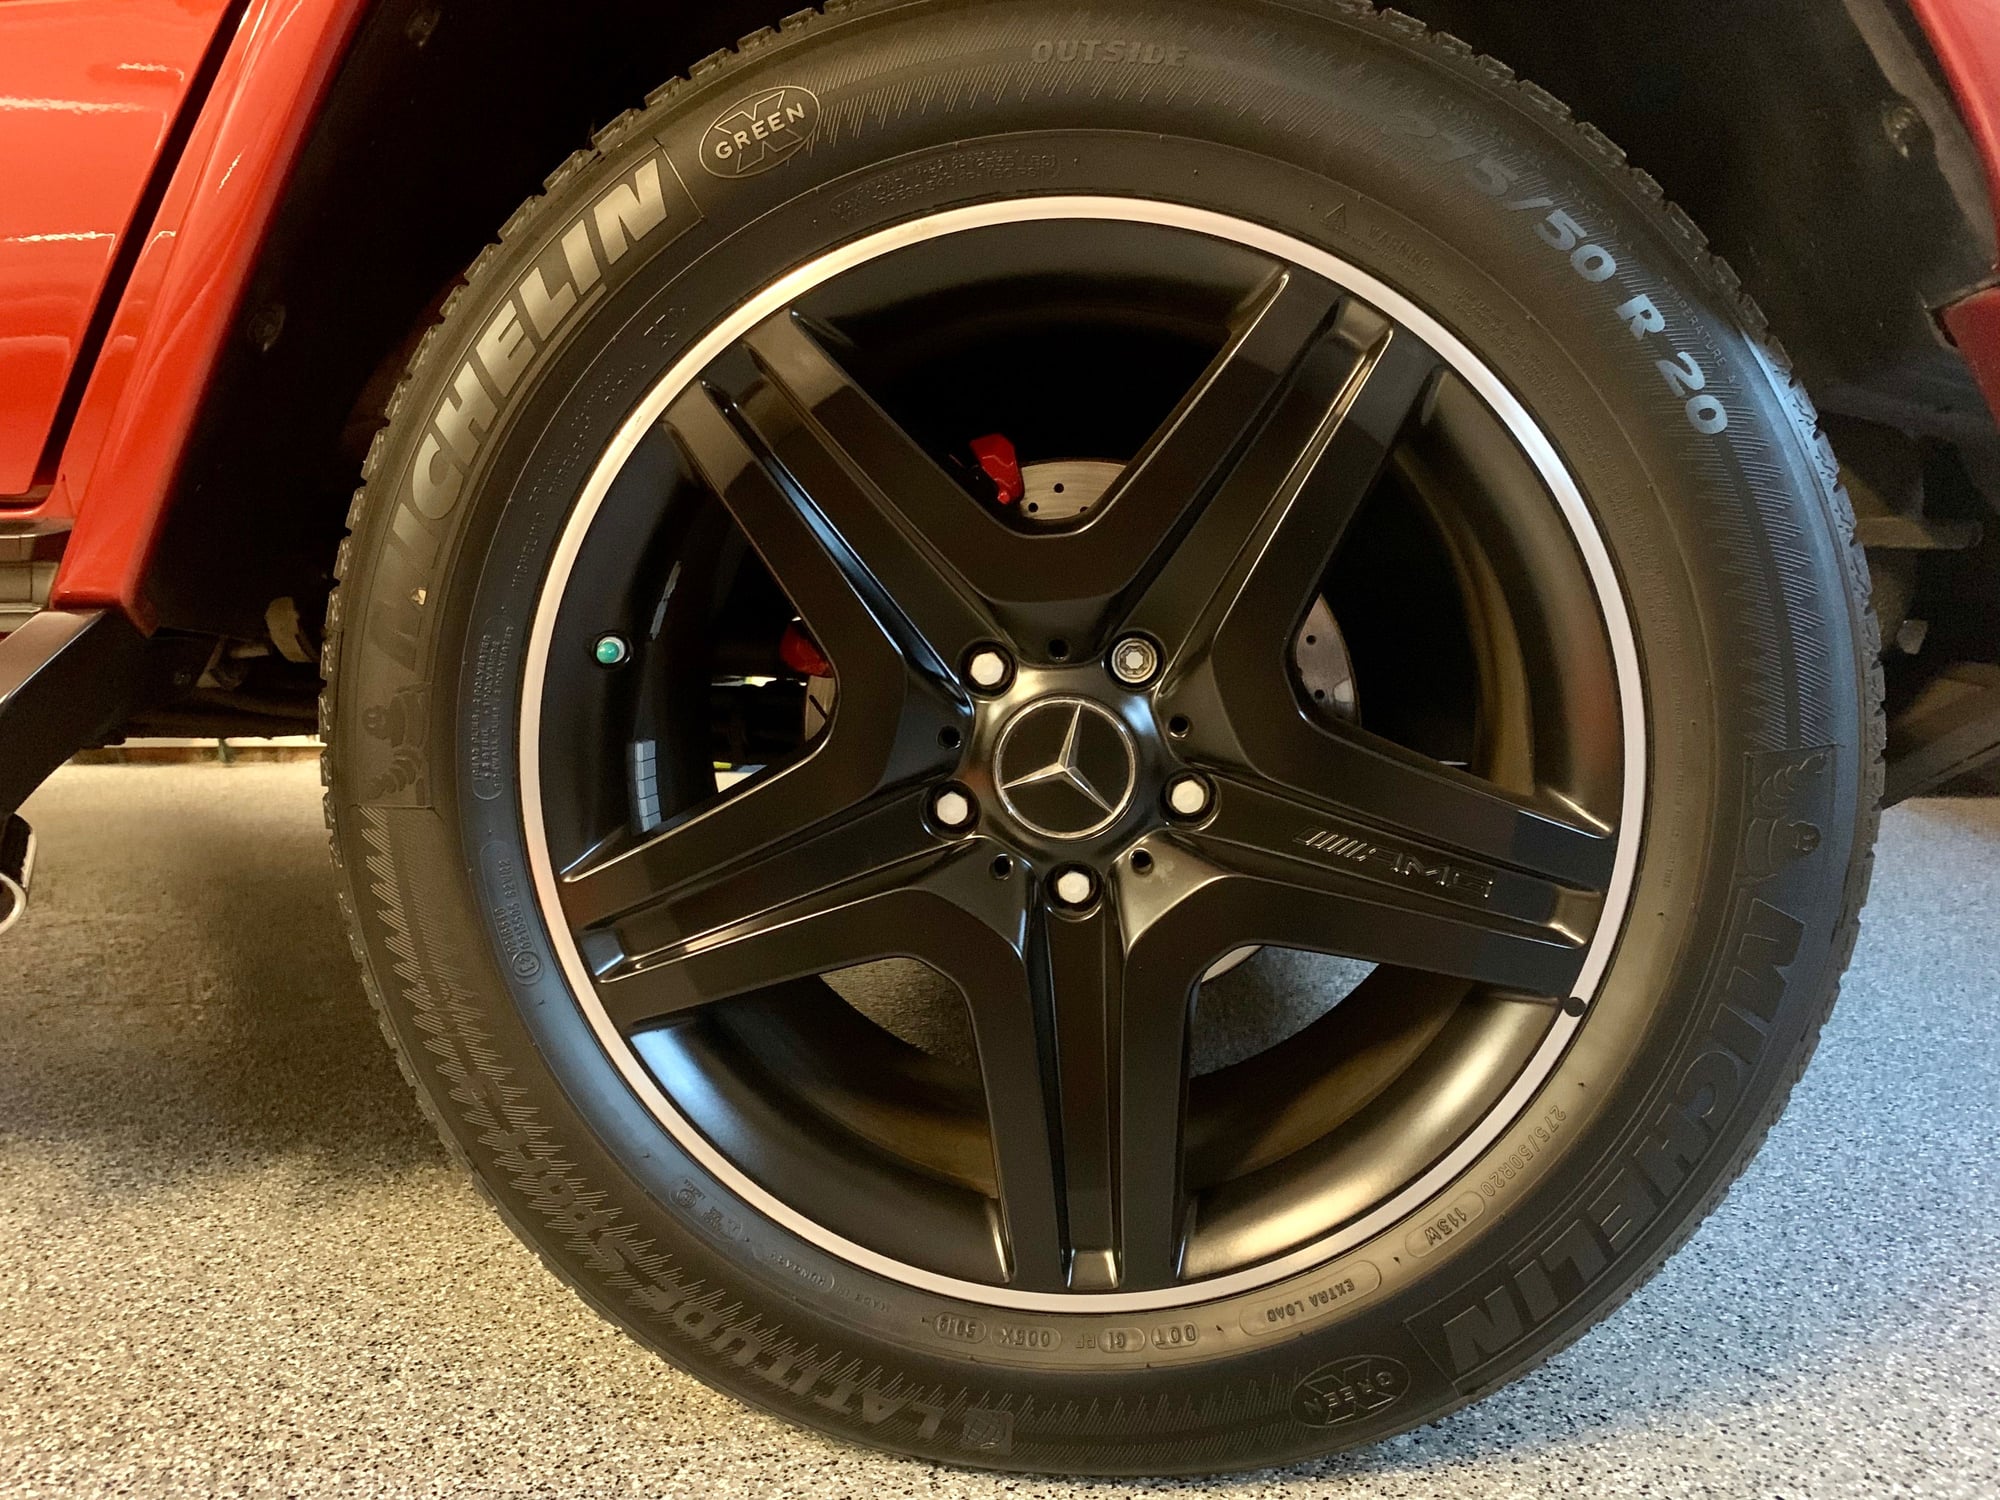 Wheels and Tires/Axles - 20” Factory OEM Wheels with Michelin Latitude tires with less than 200 miles. - Used - 2016 Mercedes-Benz G63 AMG - Anderson, SC 29621, United States